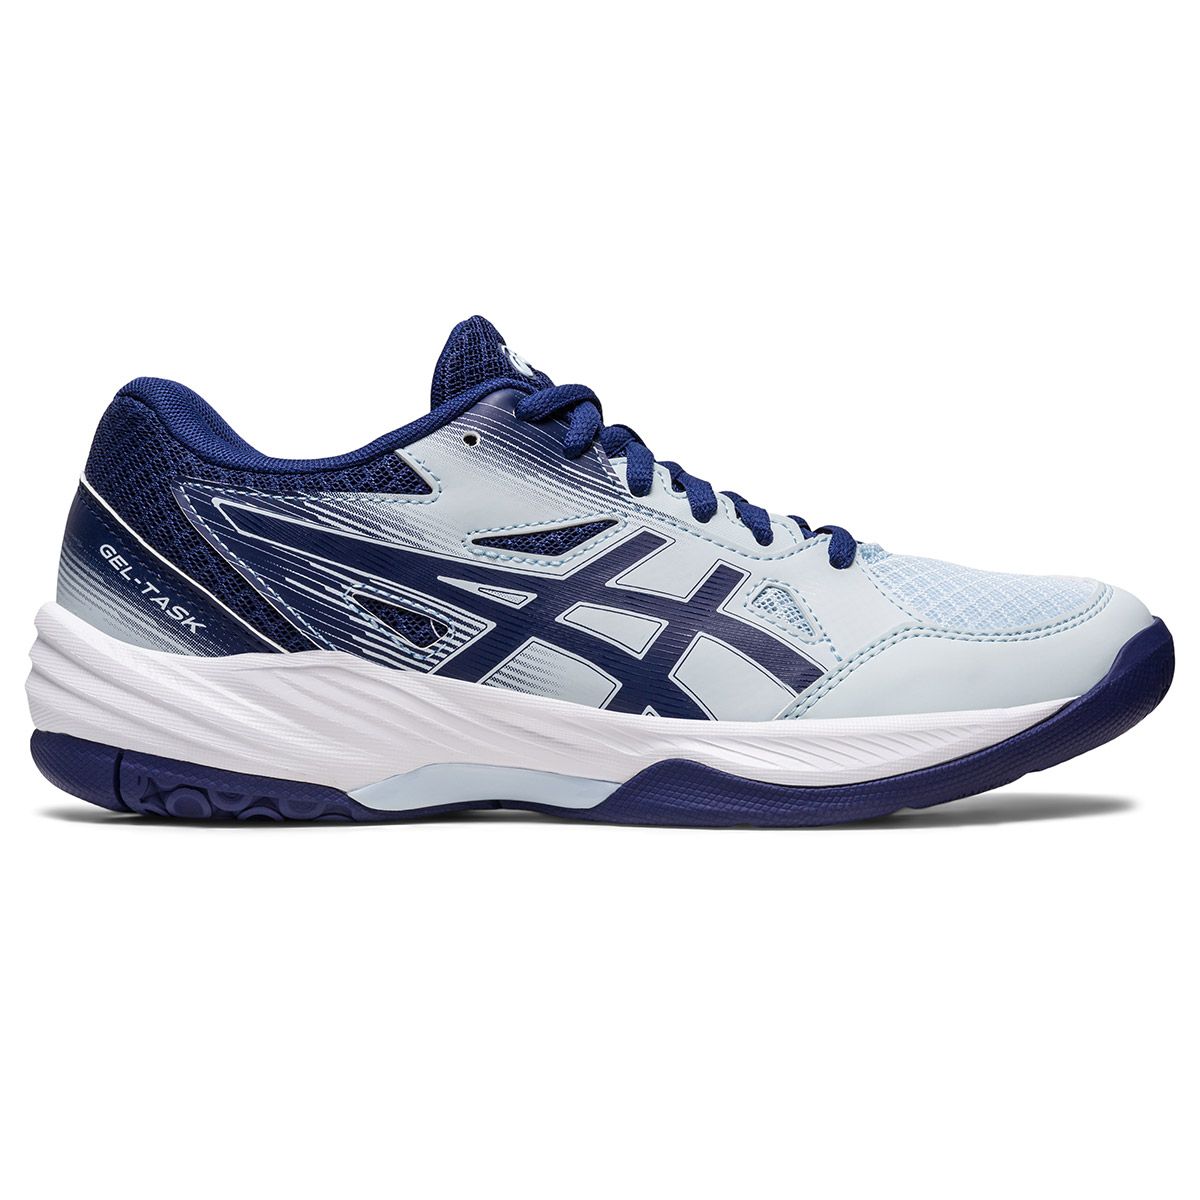 Asics Gel-Task 3 Women's Volleyball Shoes 1072A082-400